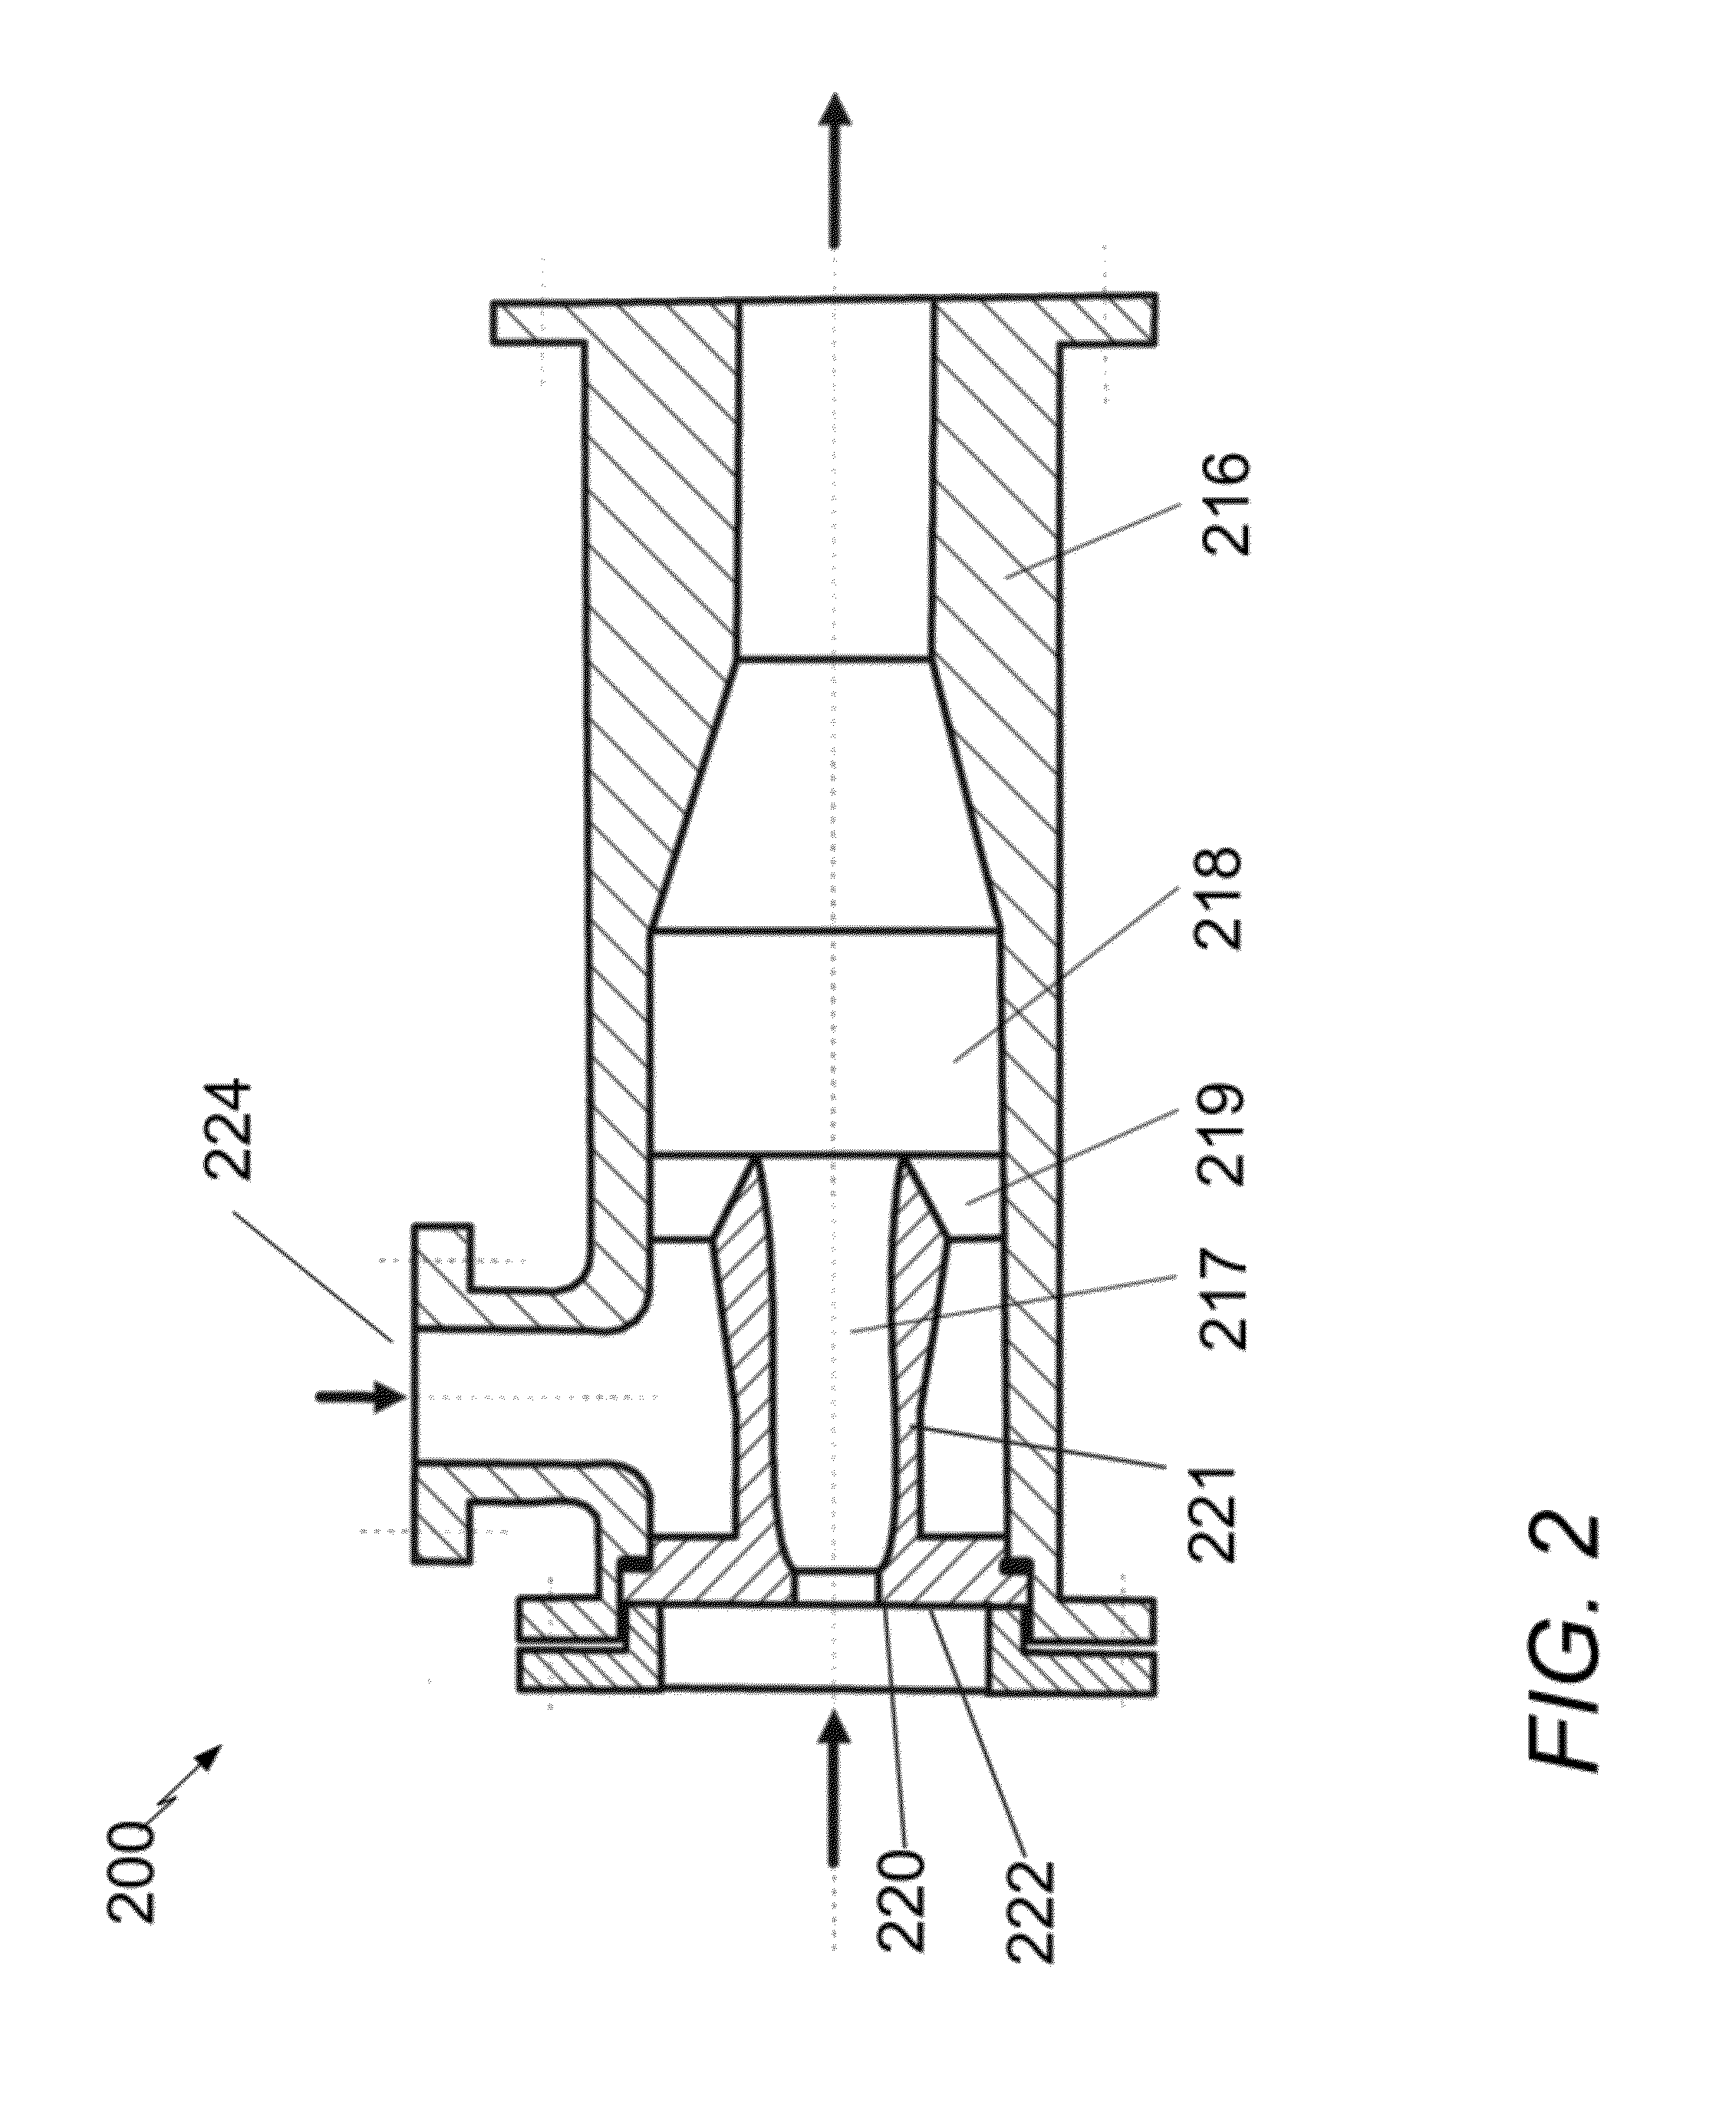 Apparatus for combustion products utilization and heat generation